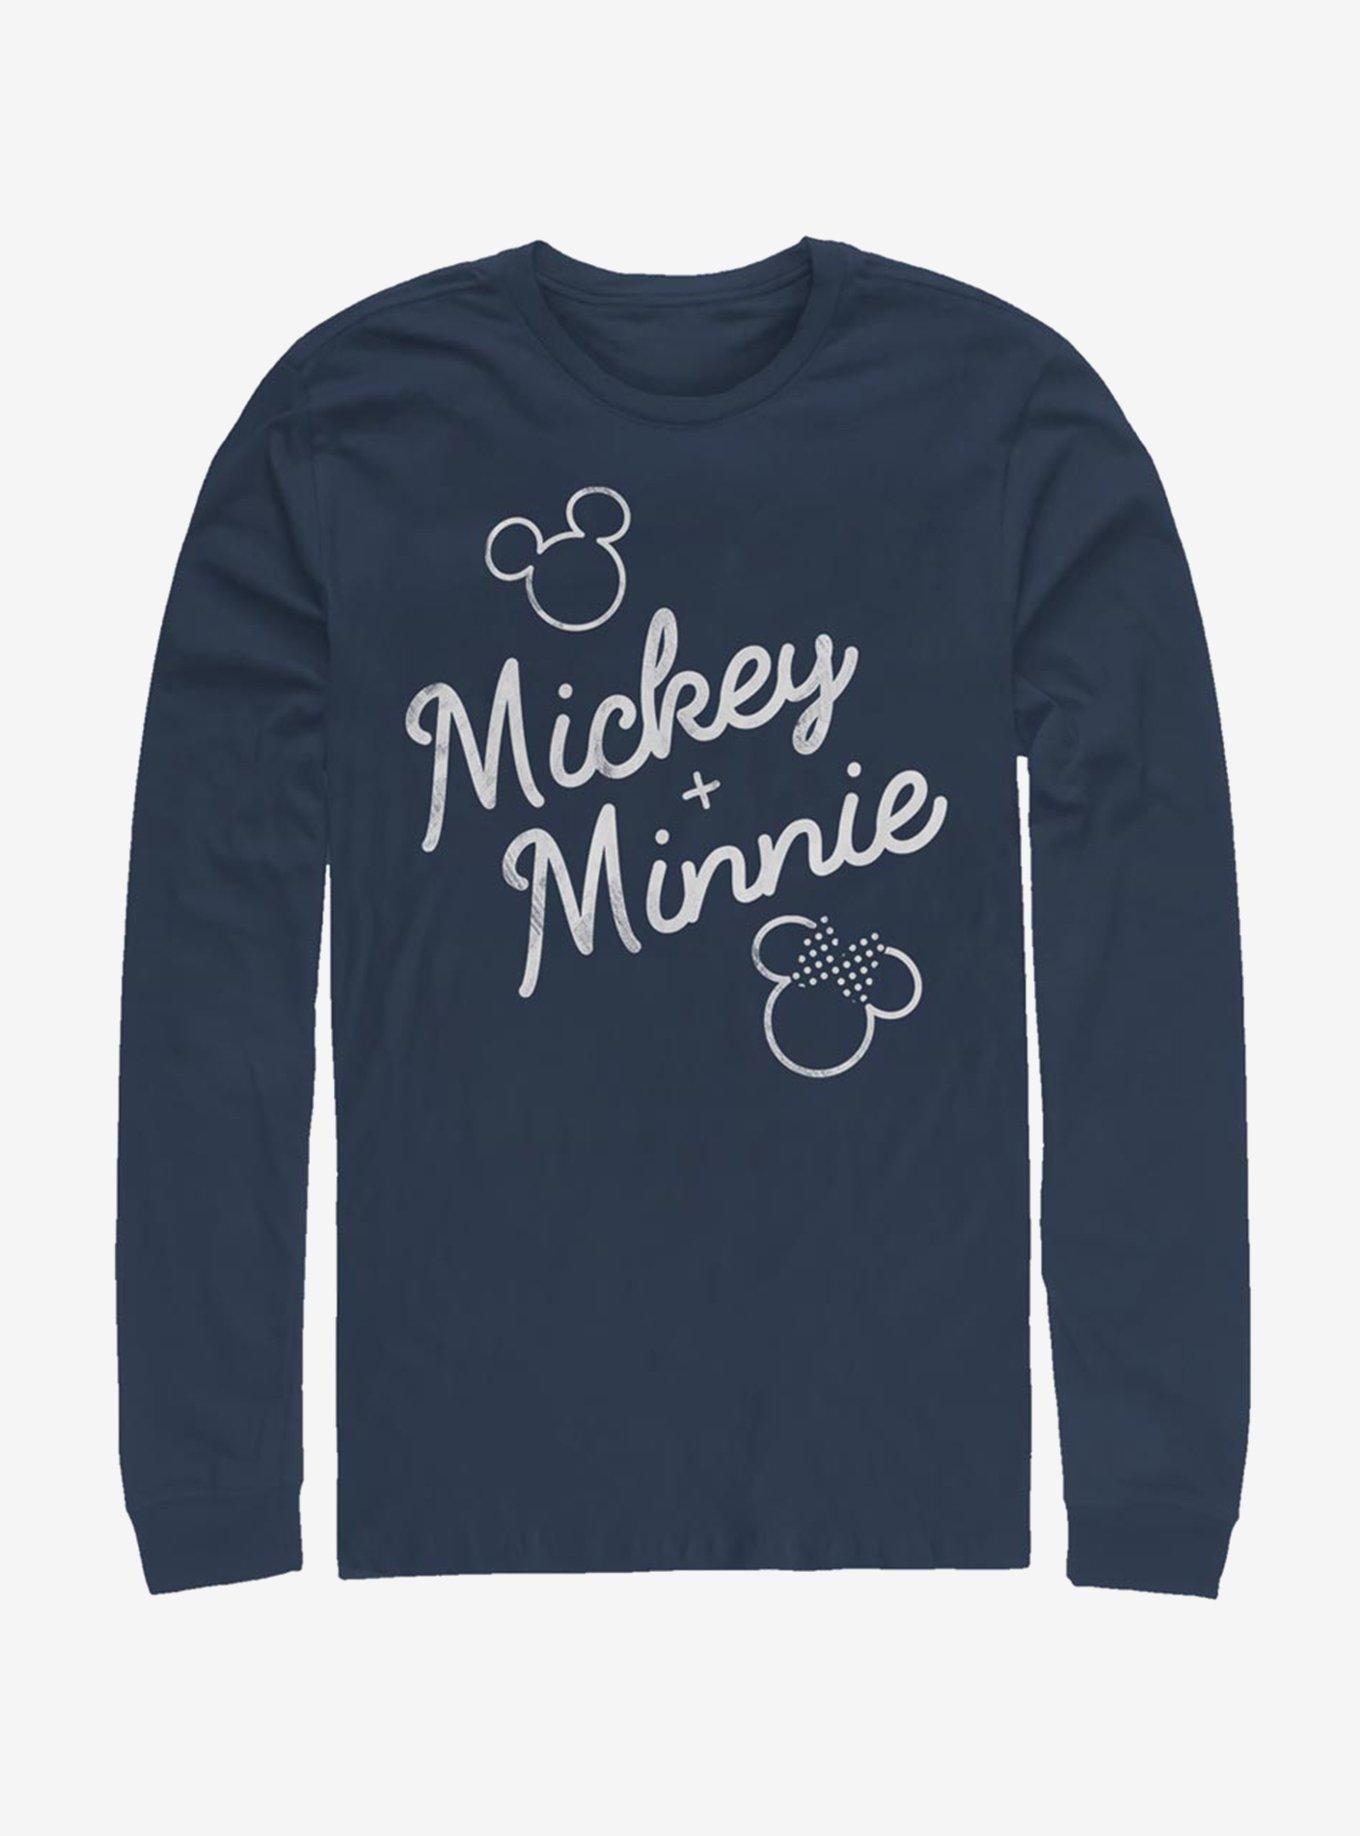 Disney Mickey Mouse Signed Together Long-Sleeve T-Shirt, NAVY, hi-res